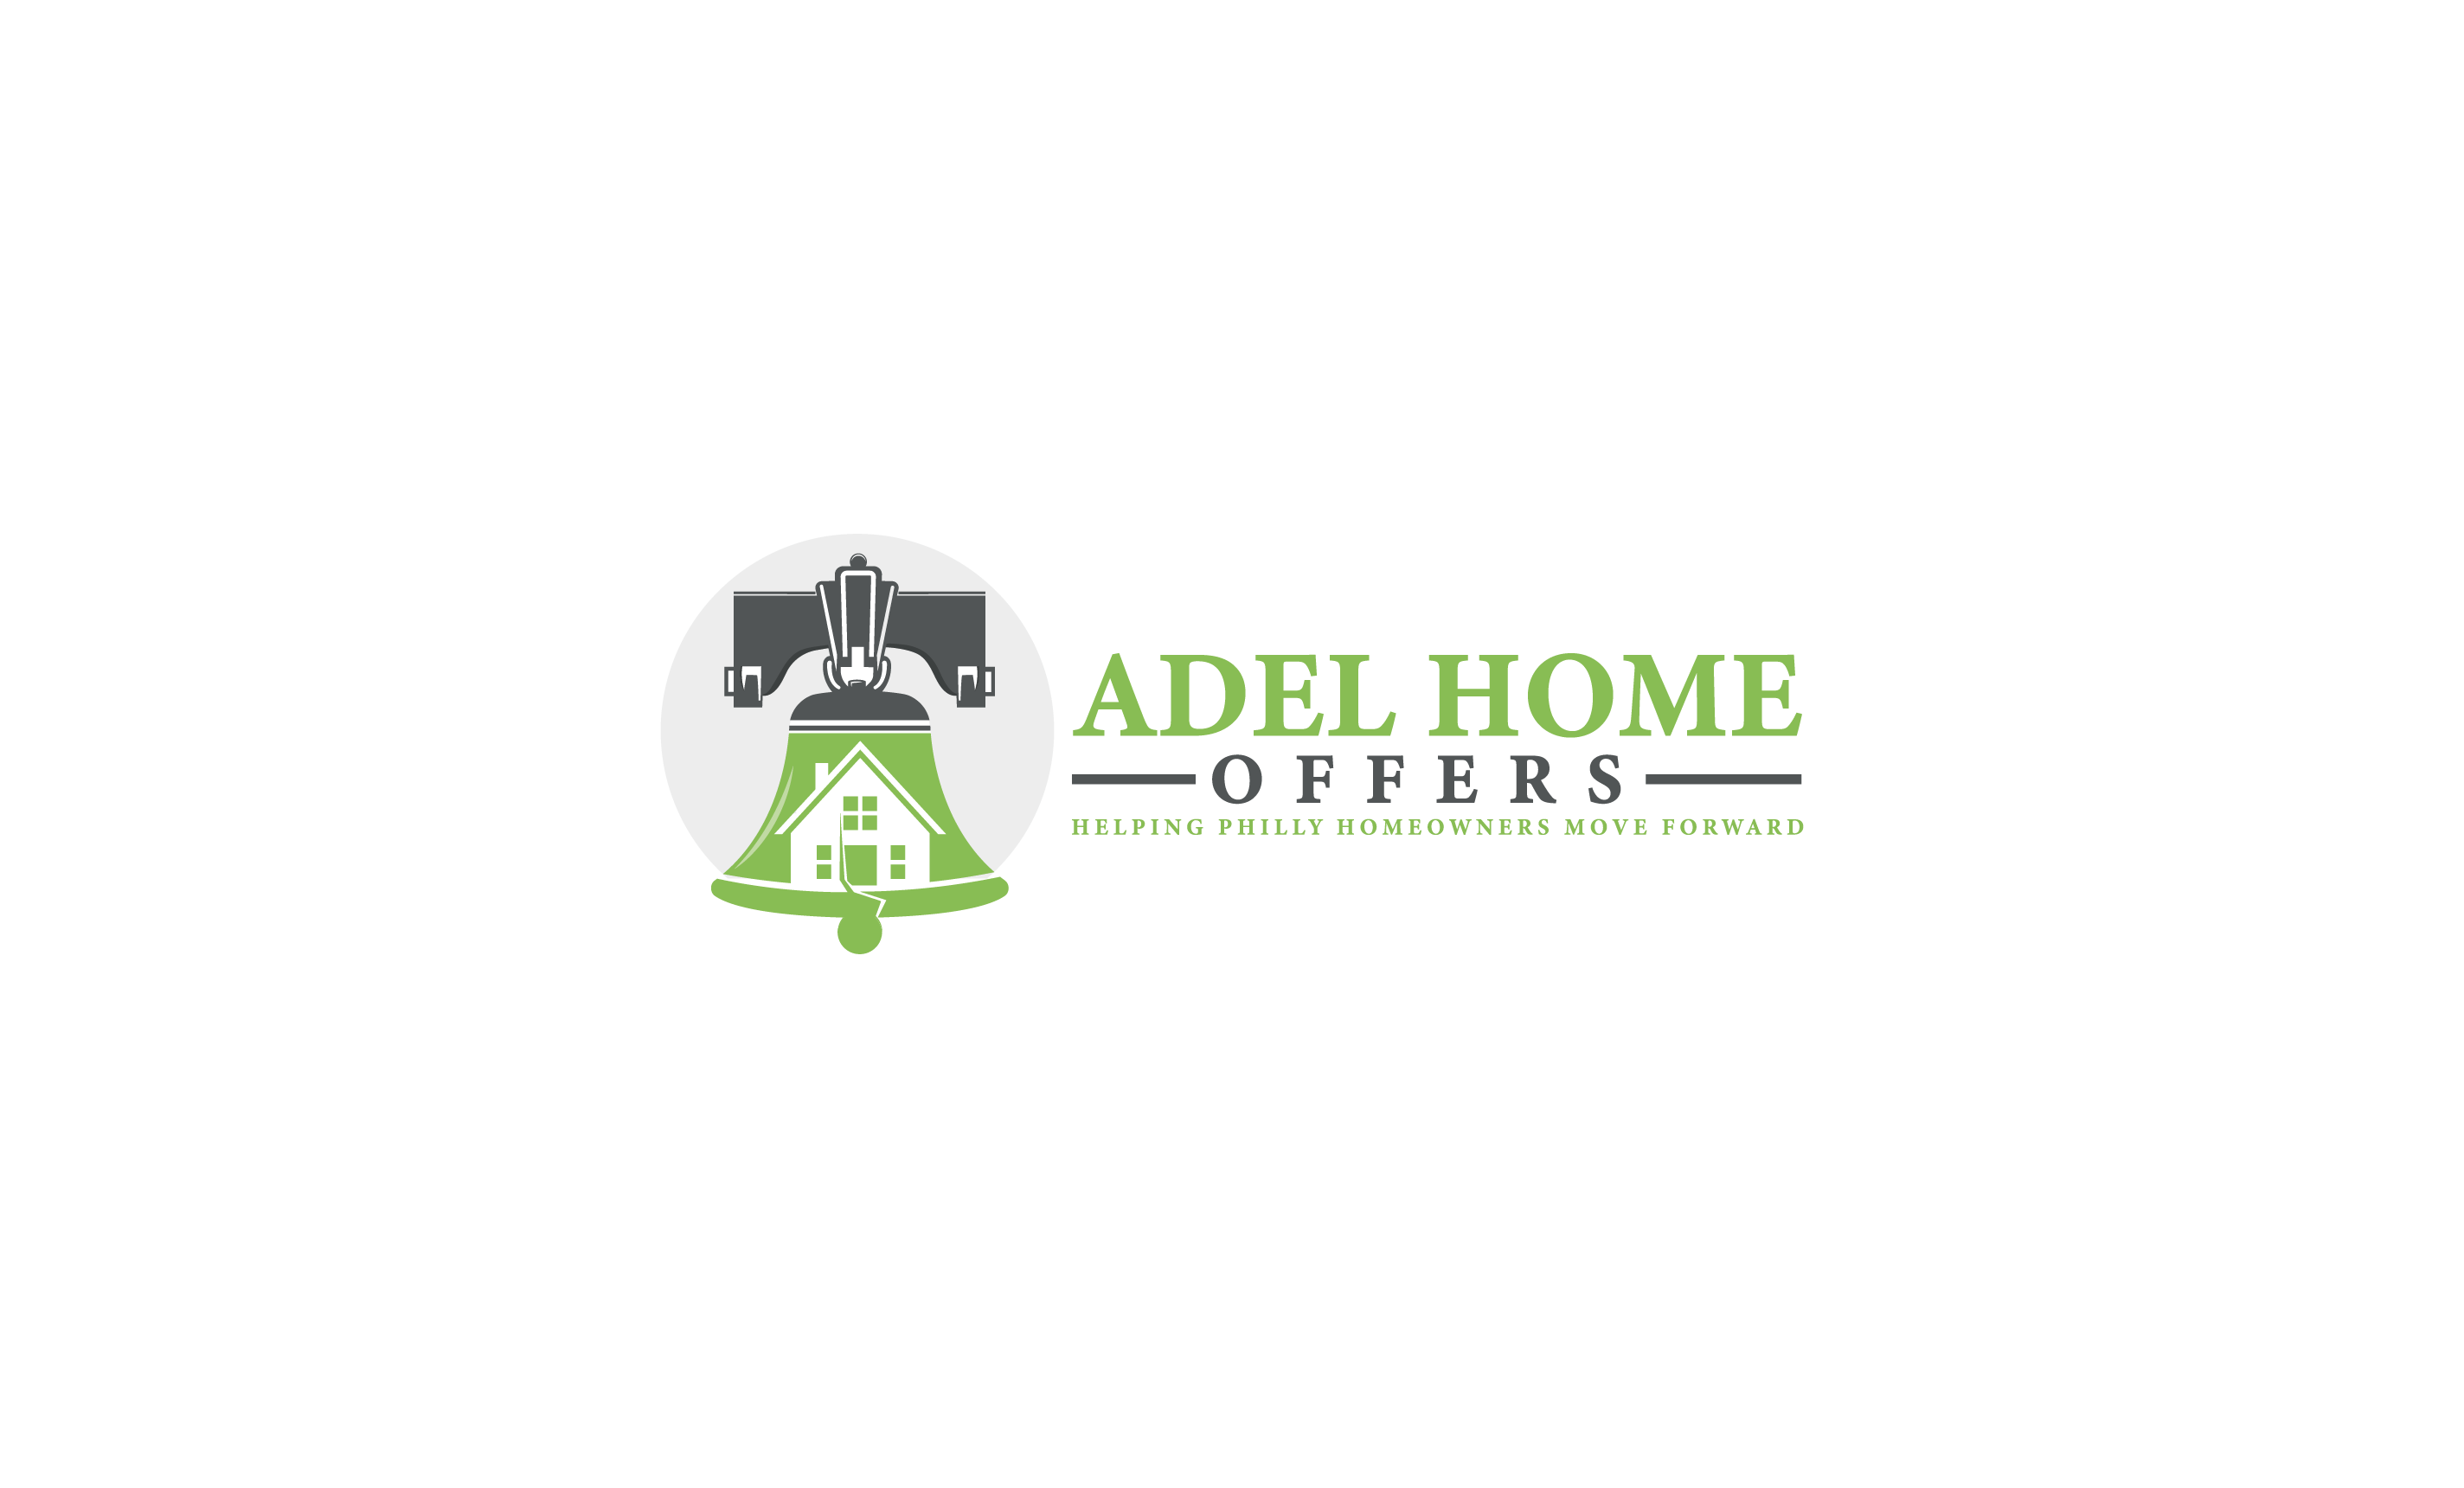 Adel Home Offers logo